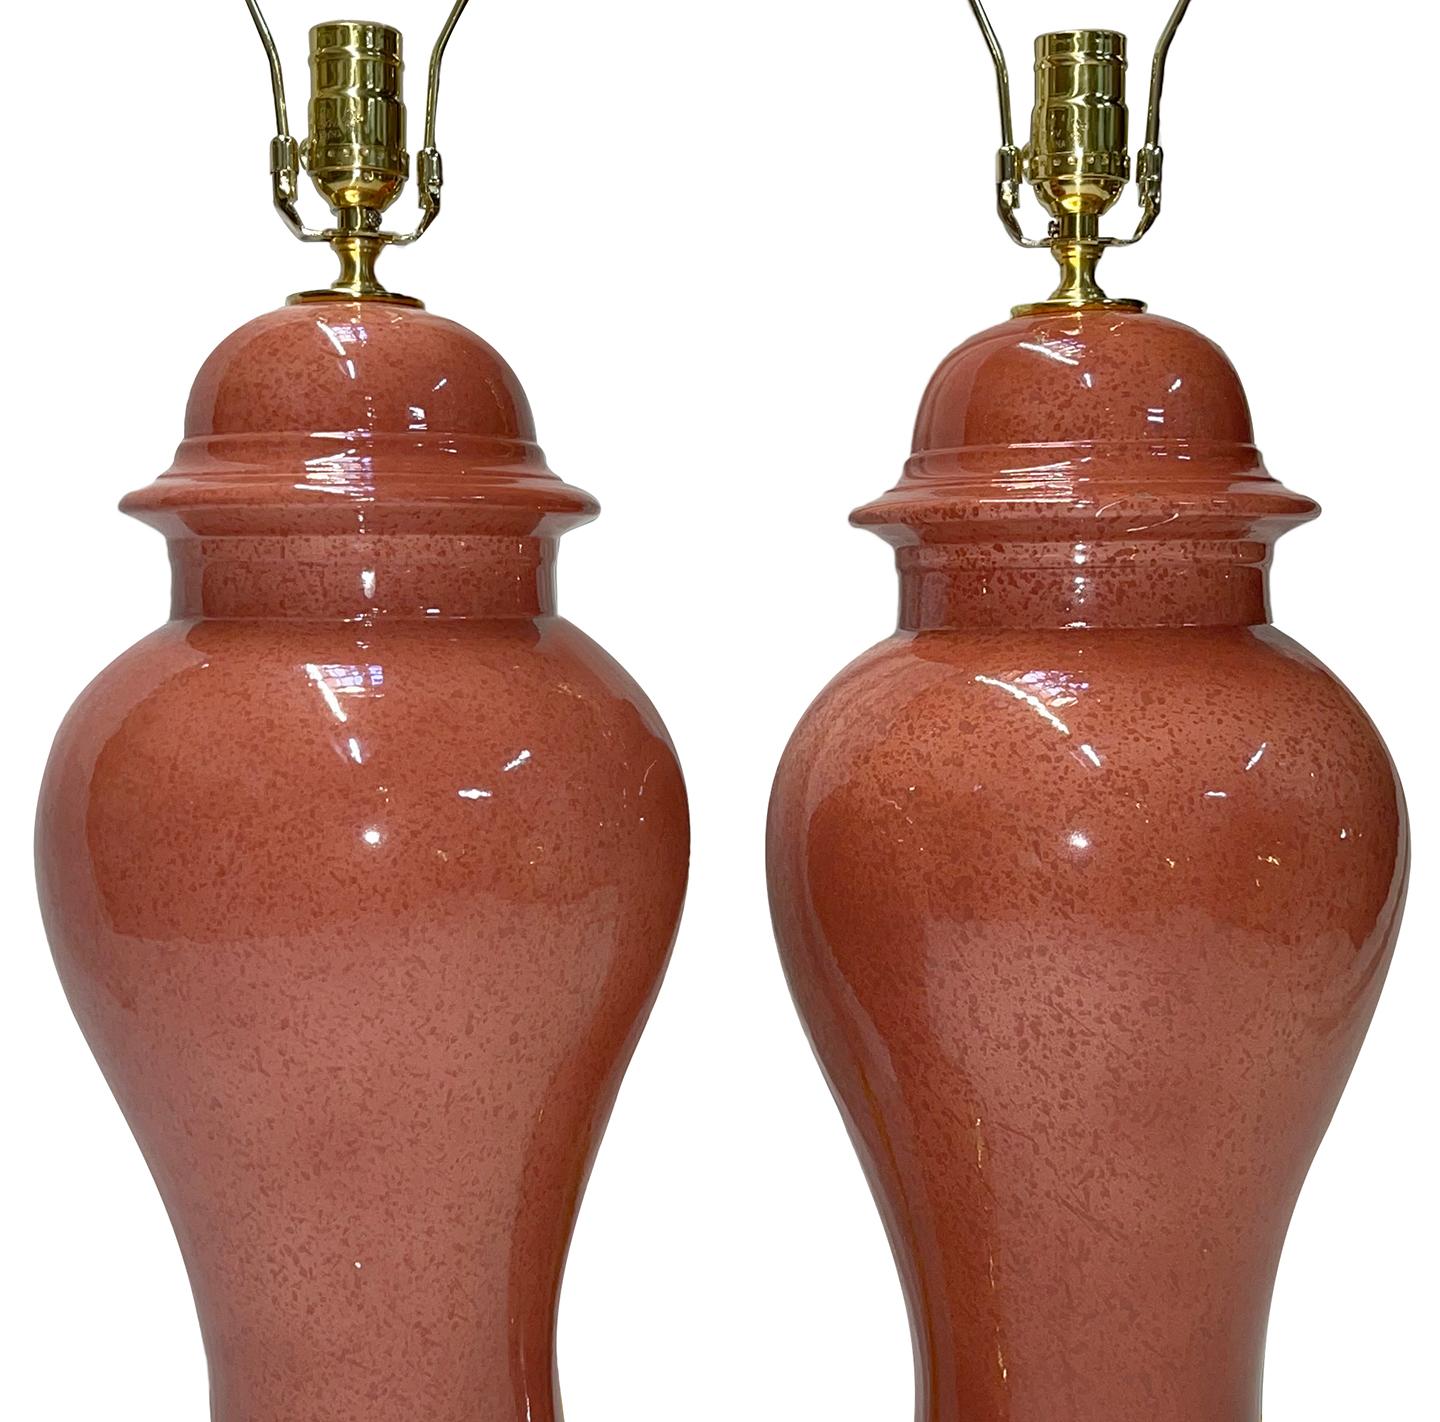 Pair of circa 1950's French porcelain table lamps with bronze bases.

Measurements:
Height of body: 21